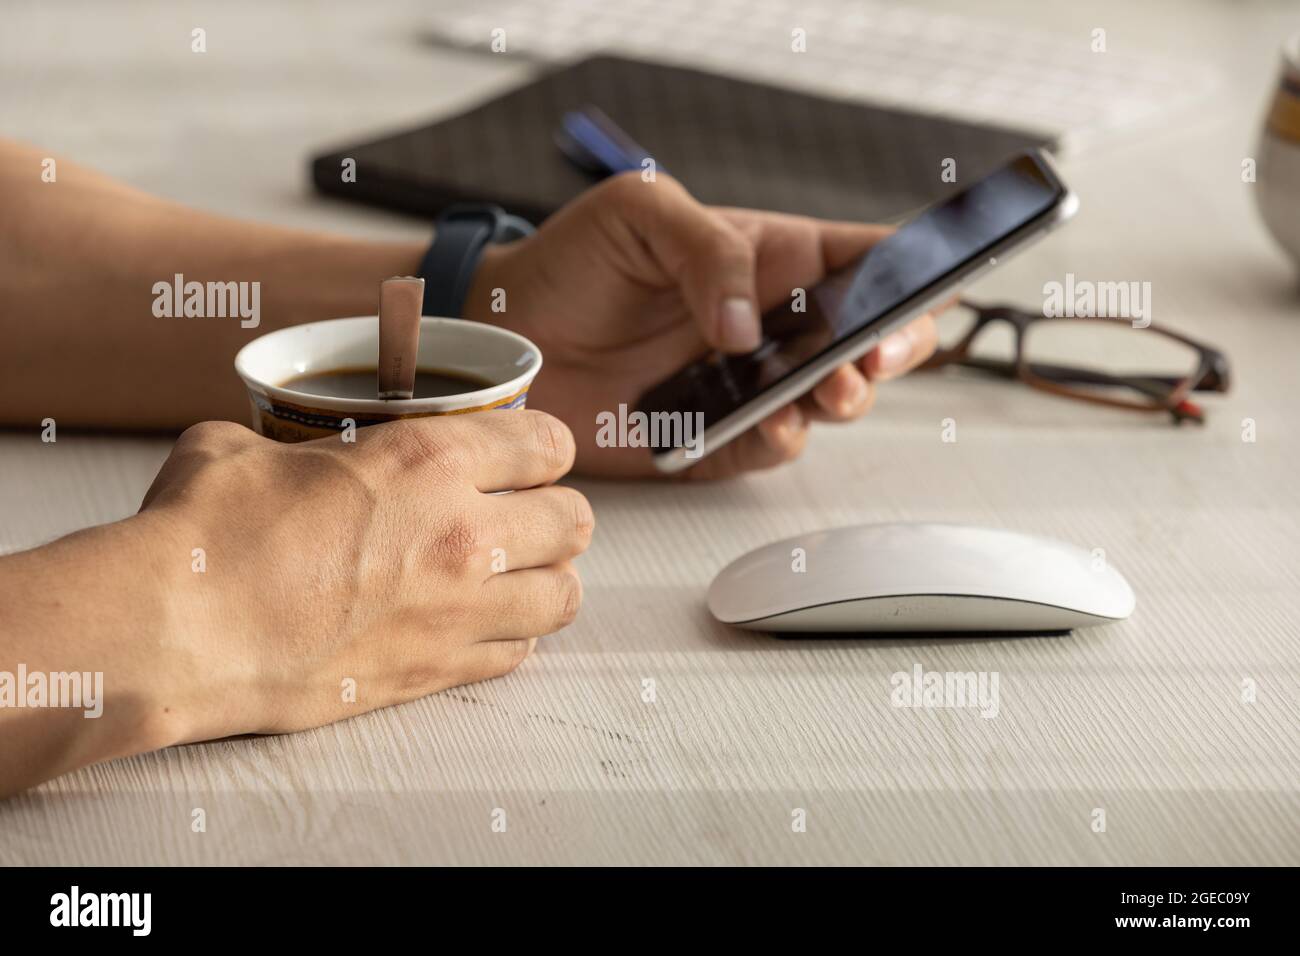 person working at his desk, detail of his hands holding a cell phone with a touch screen and with the other hand he has a cup of coffee Stock Photo